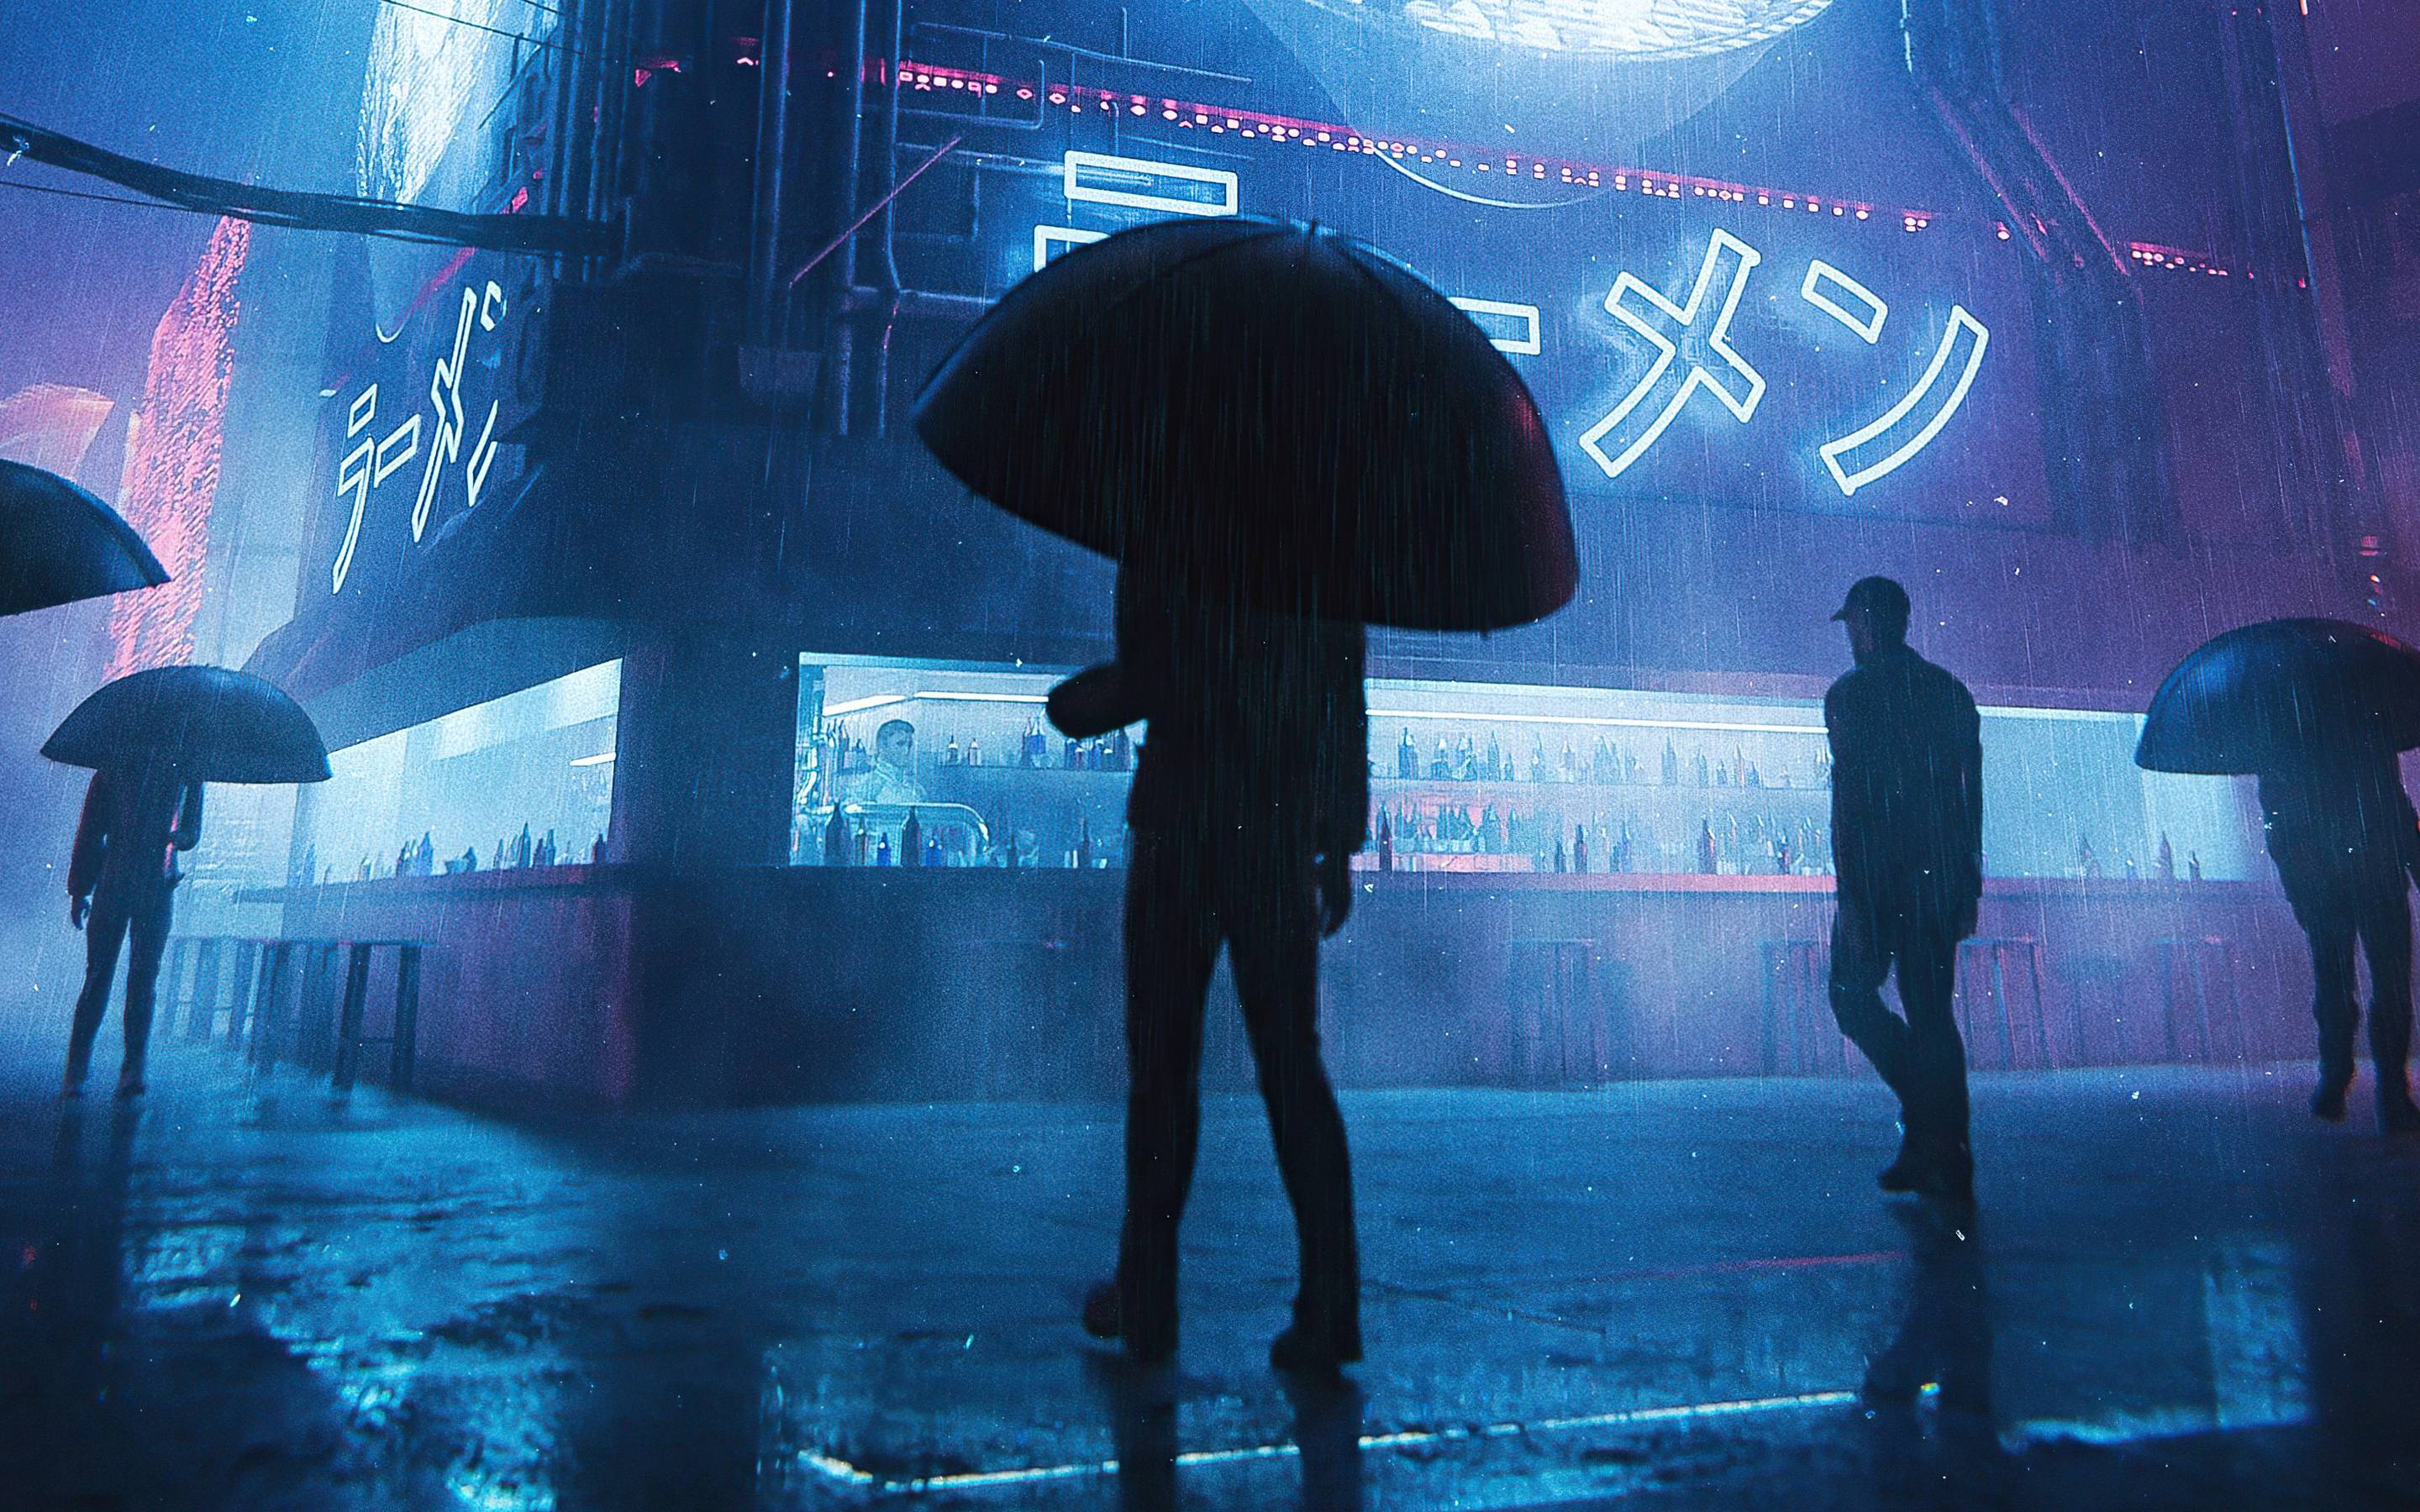 People walking in the rain with umbrellas in the neon-lit city of Blade Runner. - Rain, Japanese